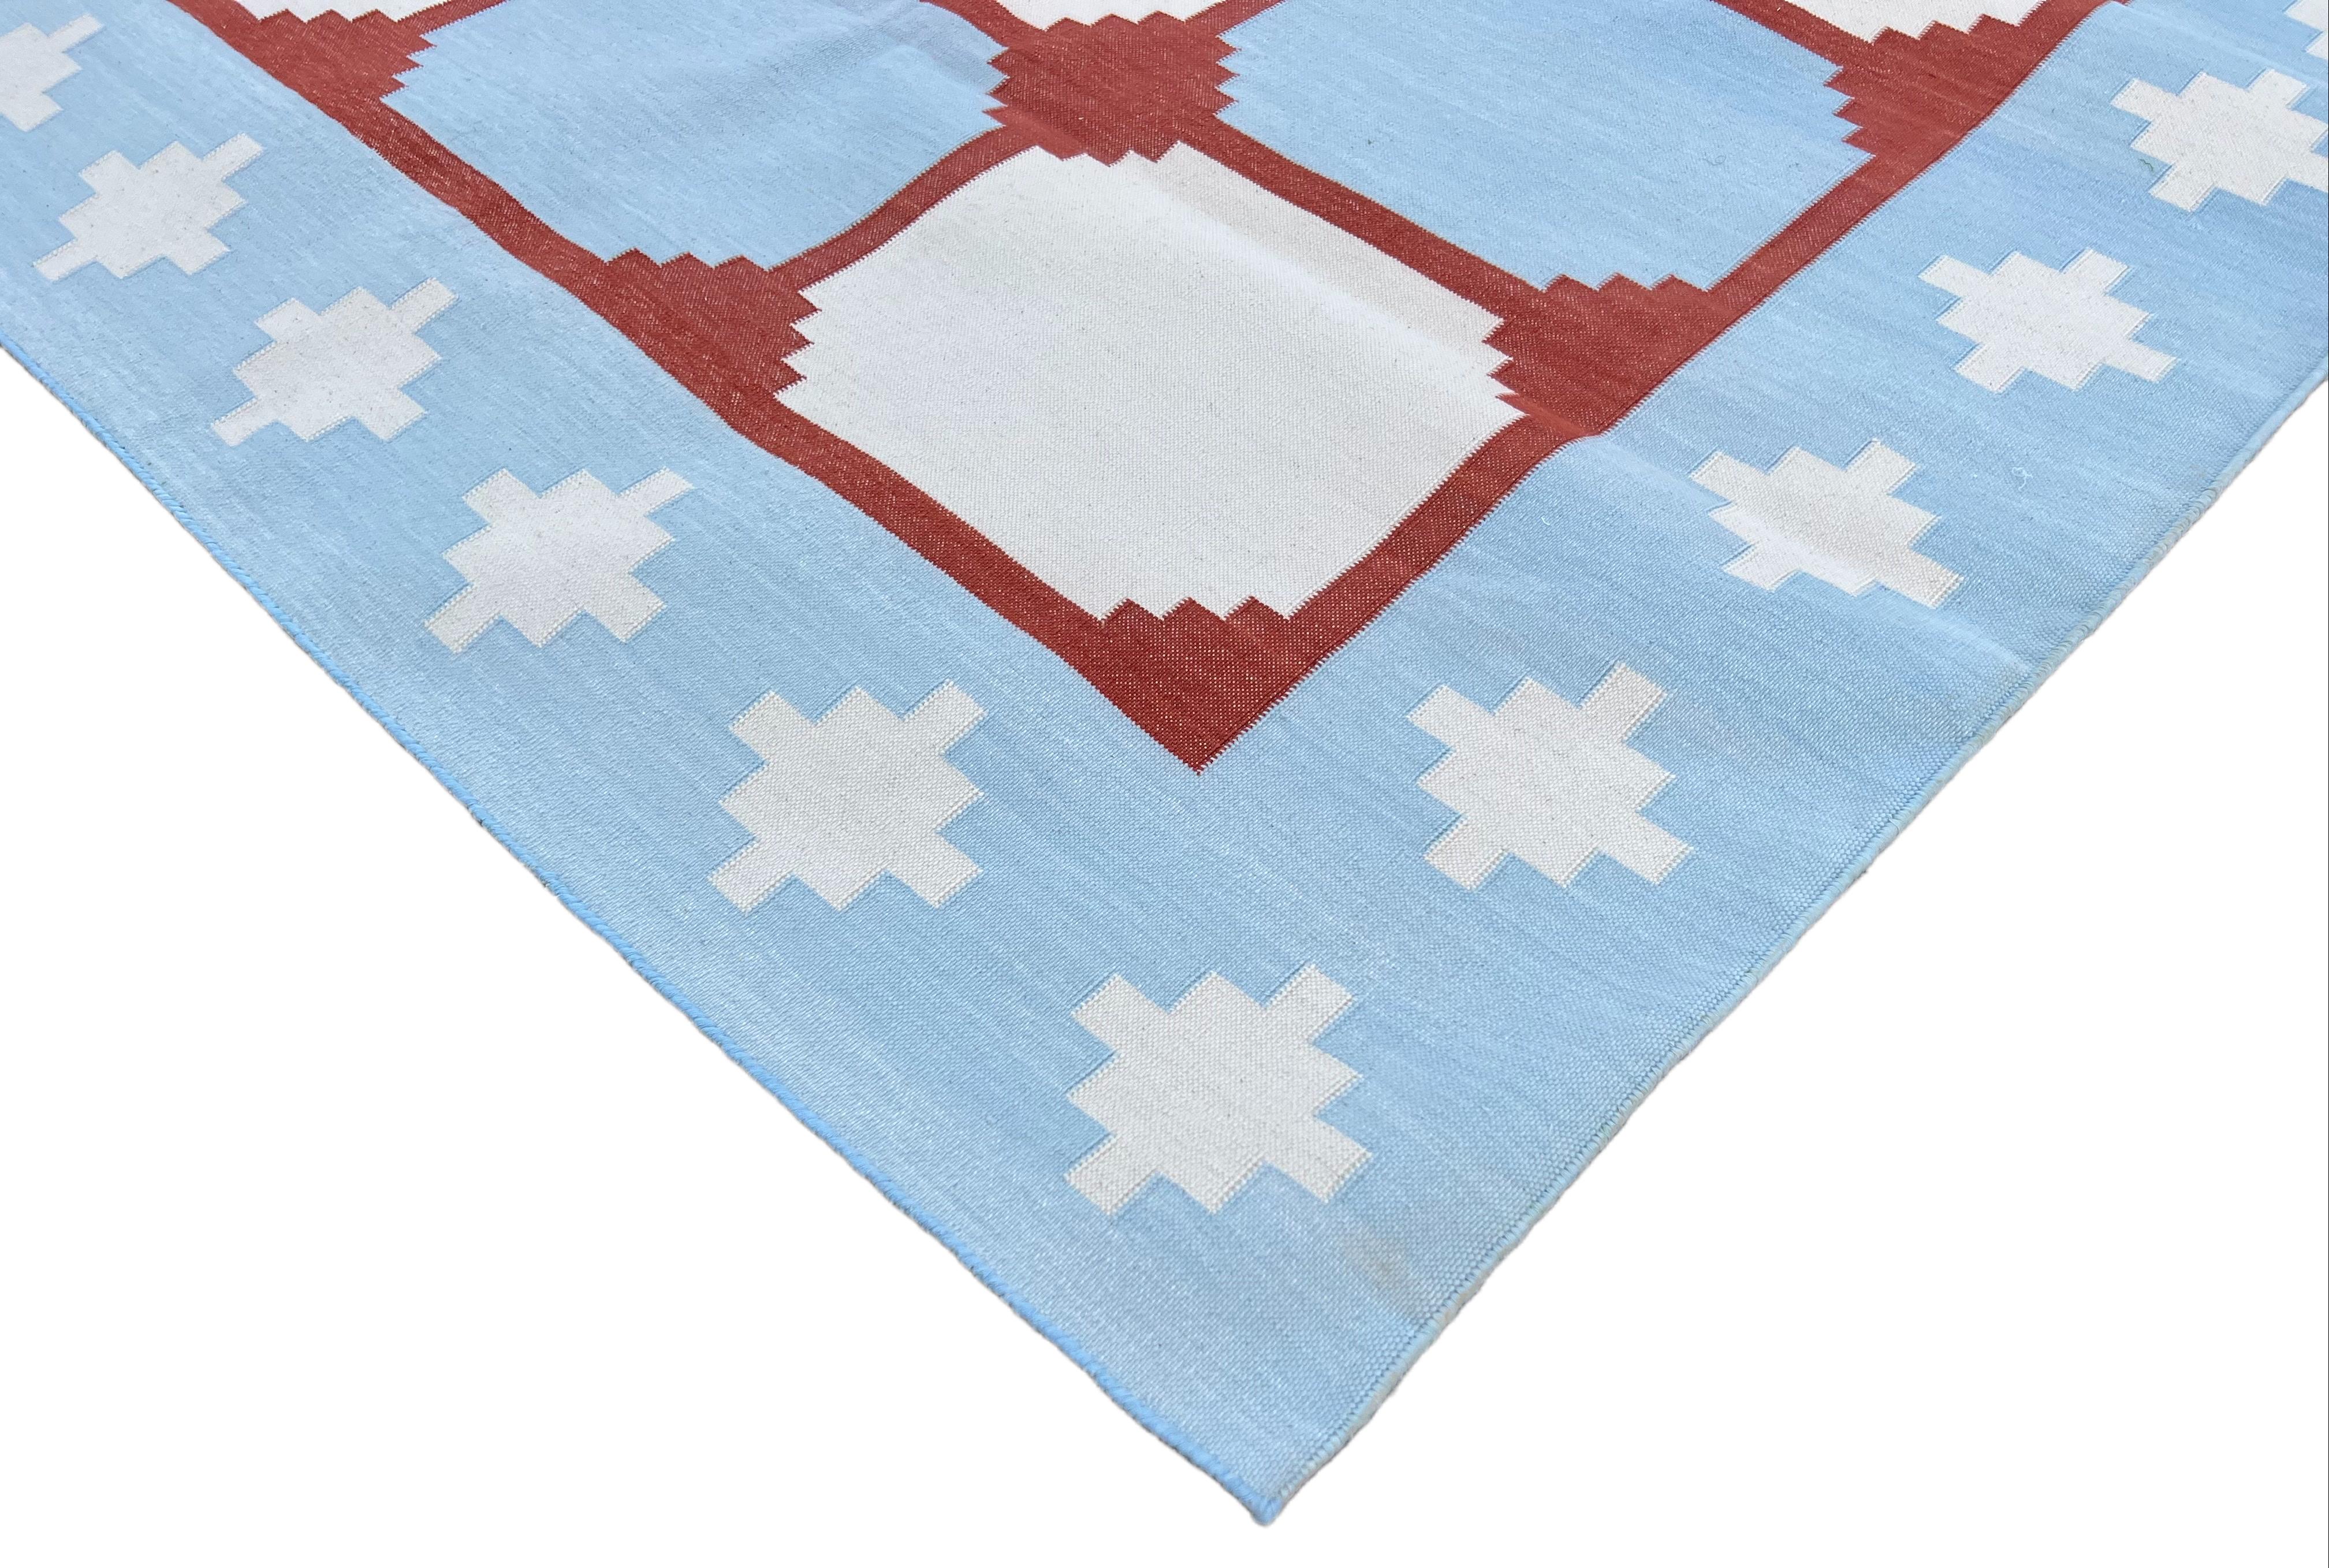 Mid-Century Modern Handmade Cotton Area Flat Weave Rug, Blue & Red Indian Star Geometric Dhurrie For Sale